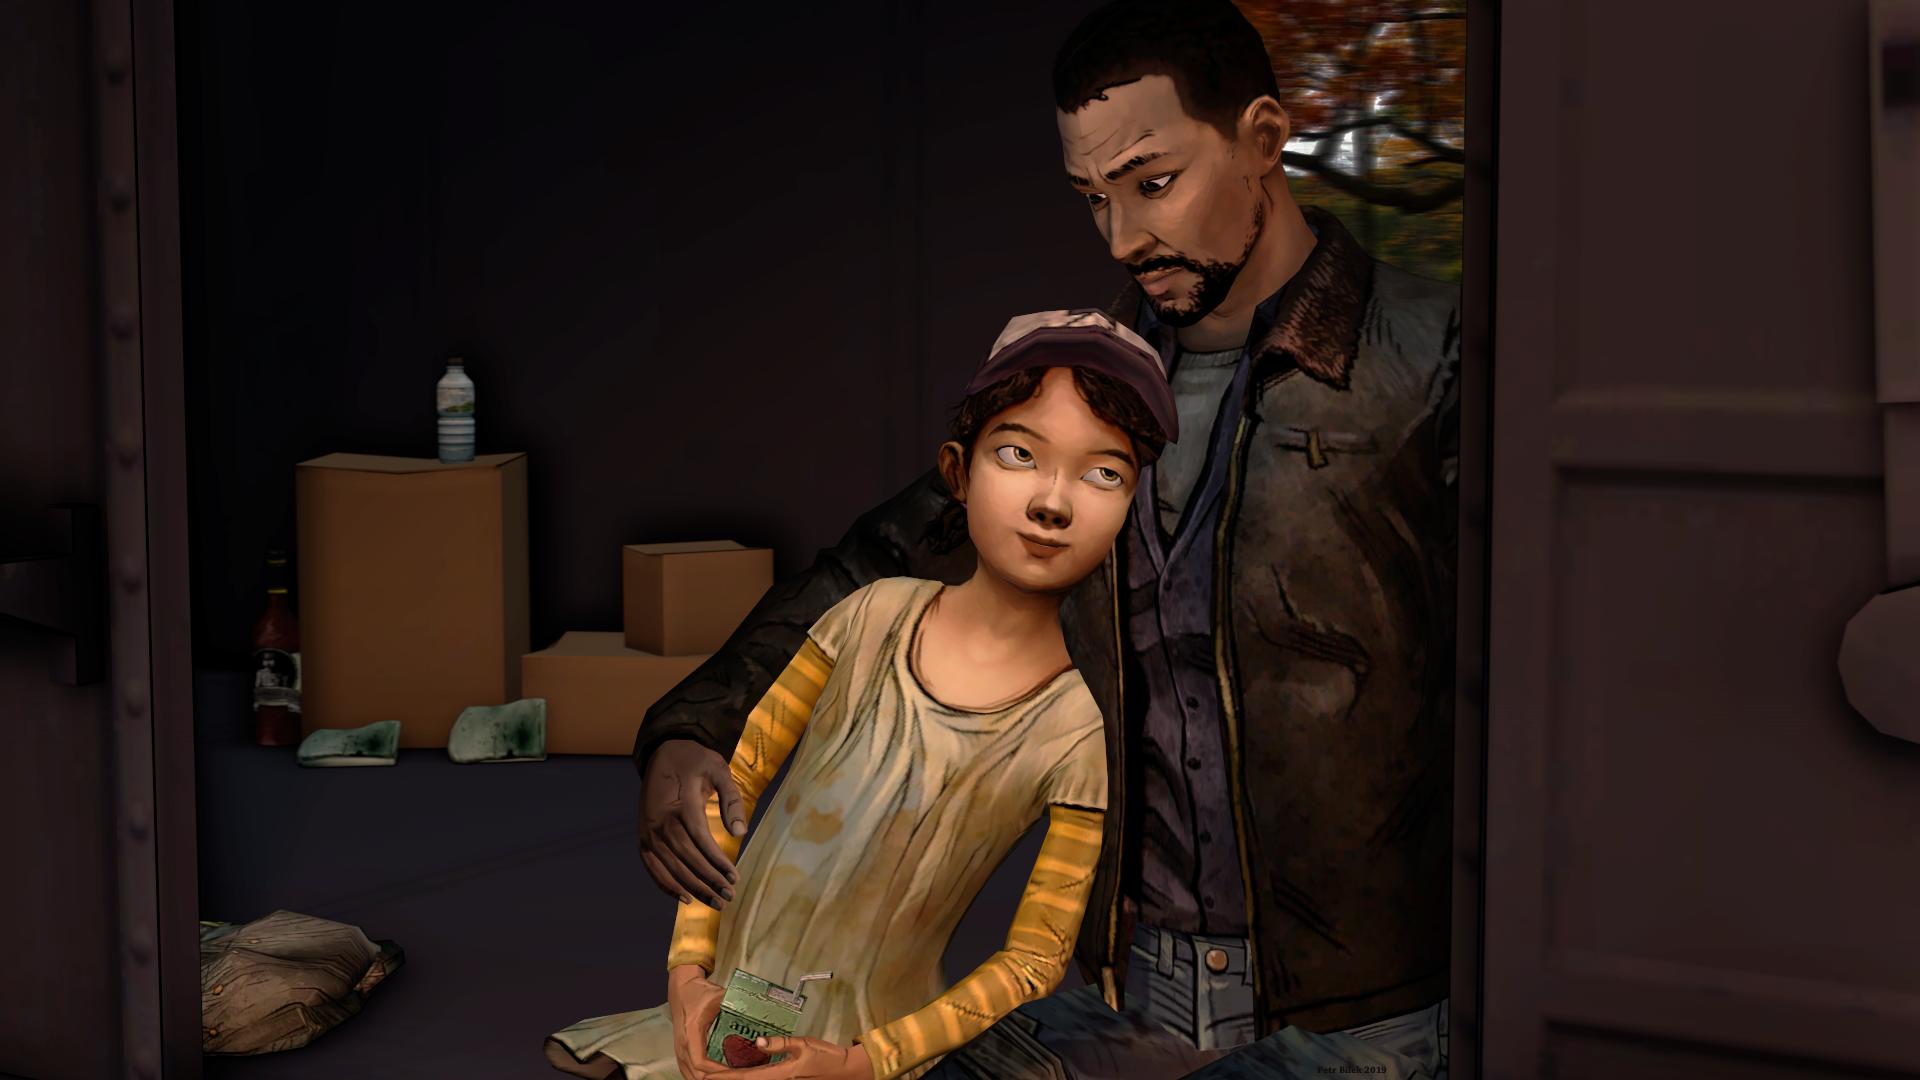 Lee and Clementine by foreachKid on DeviantArt